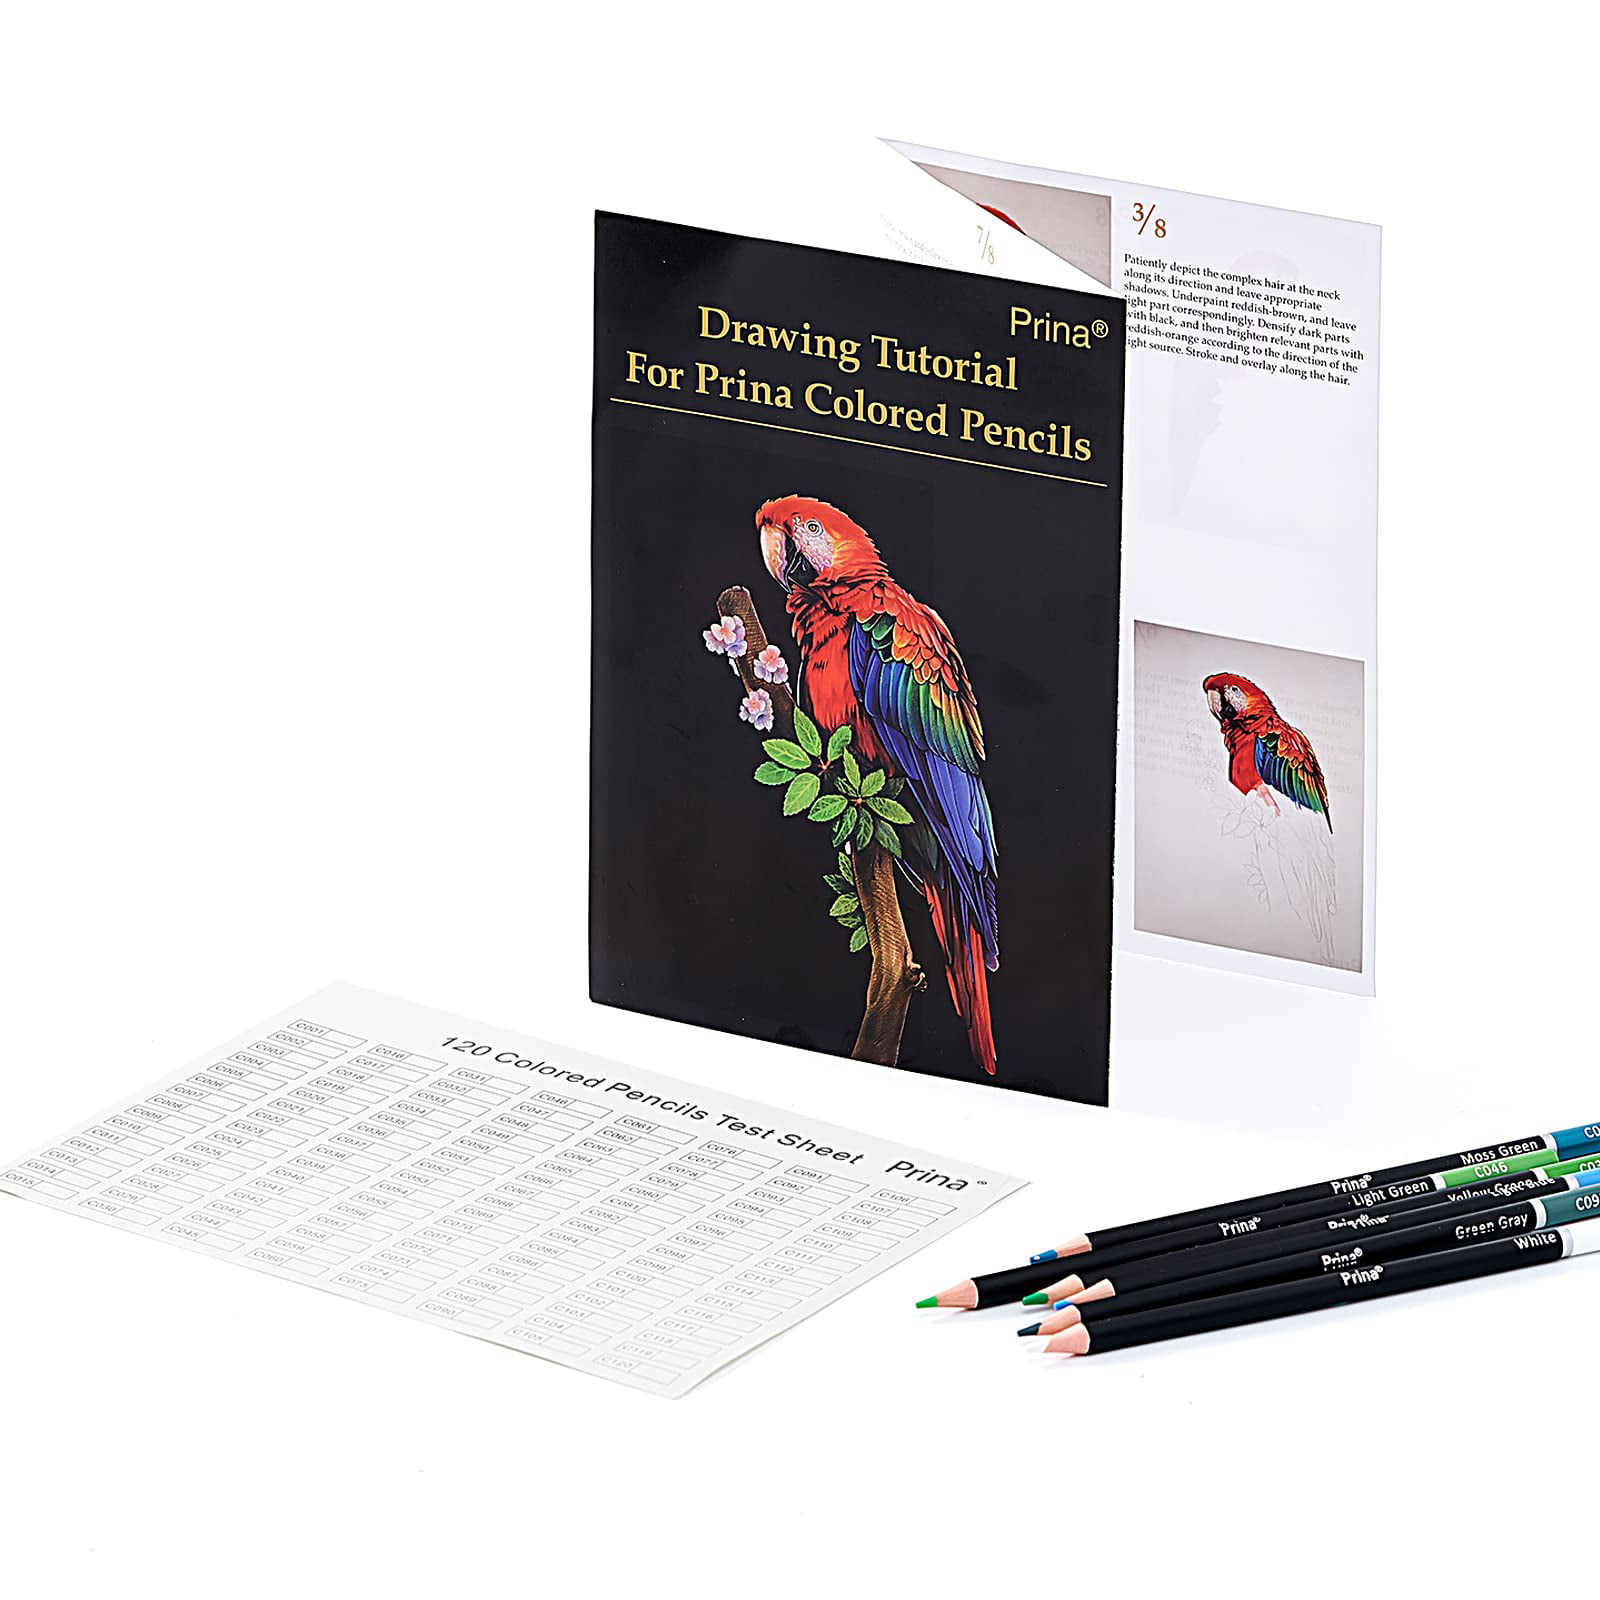 The Best Colored Pencils for Adult Coloring Books — Carrie L. Lewis, Artist